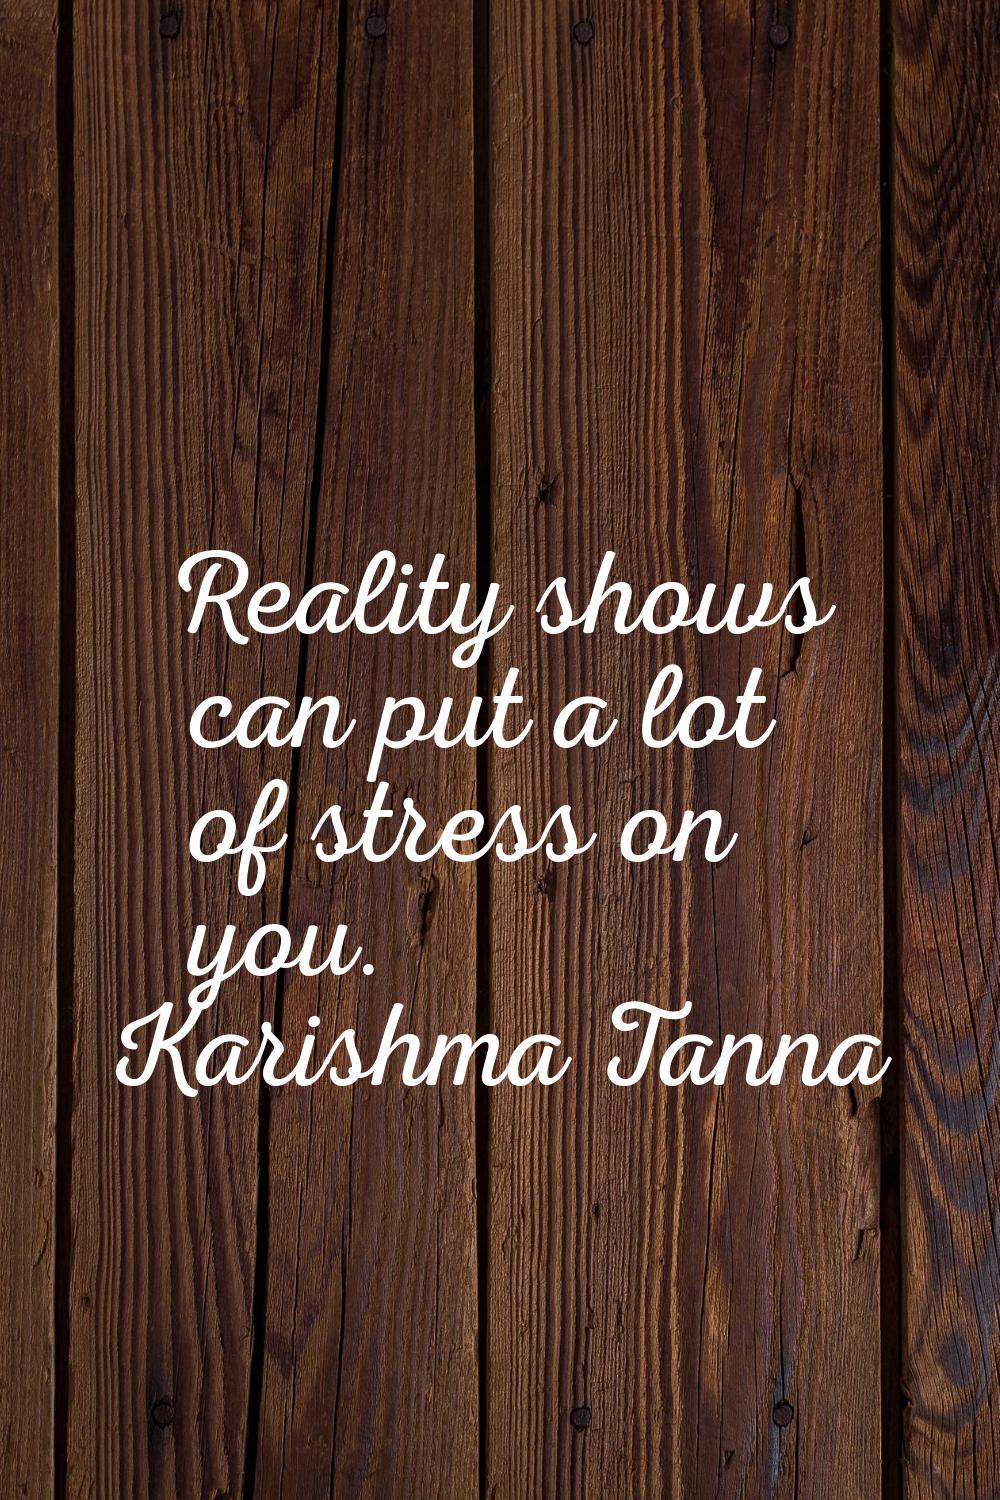 Reality shows can put a lot of stress on you.